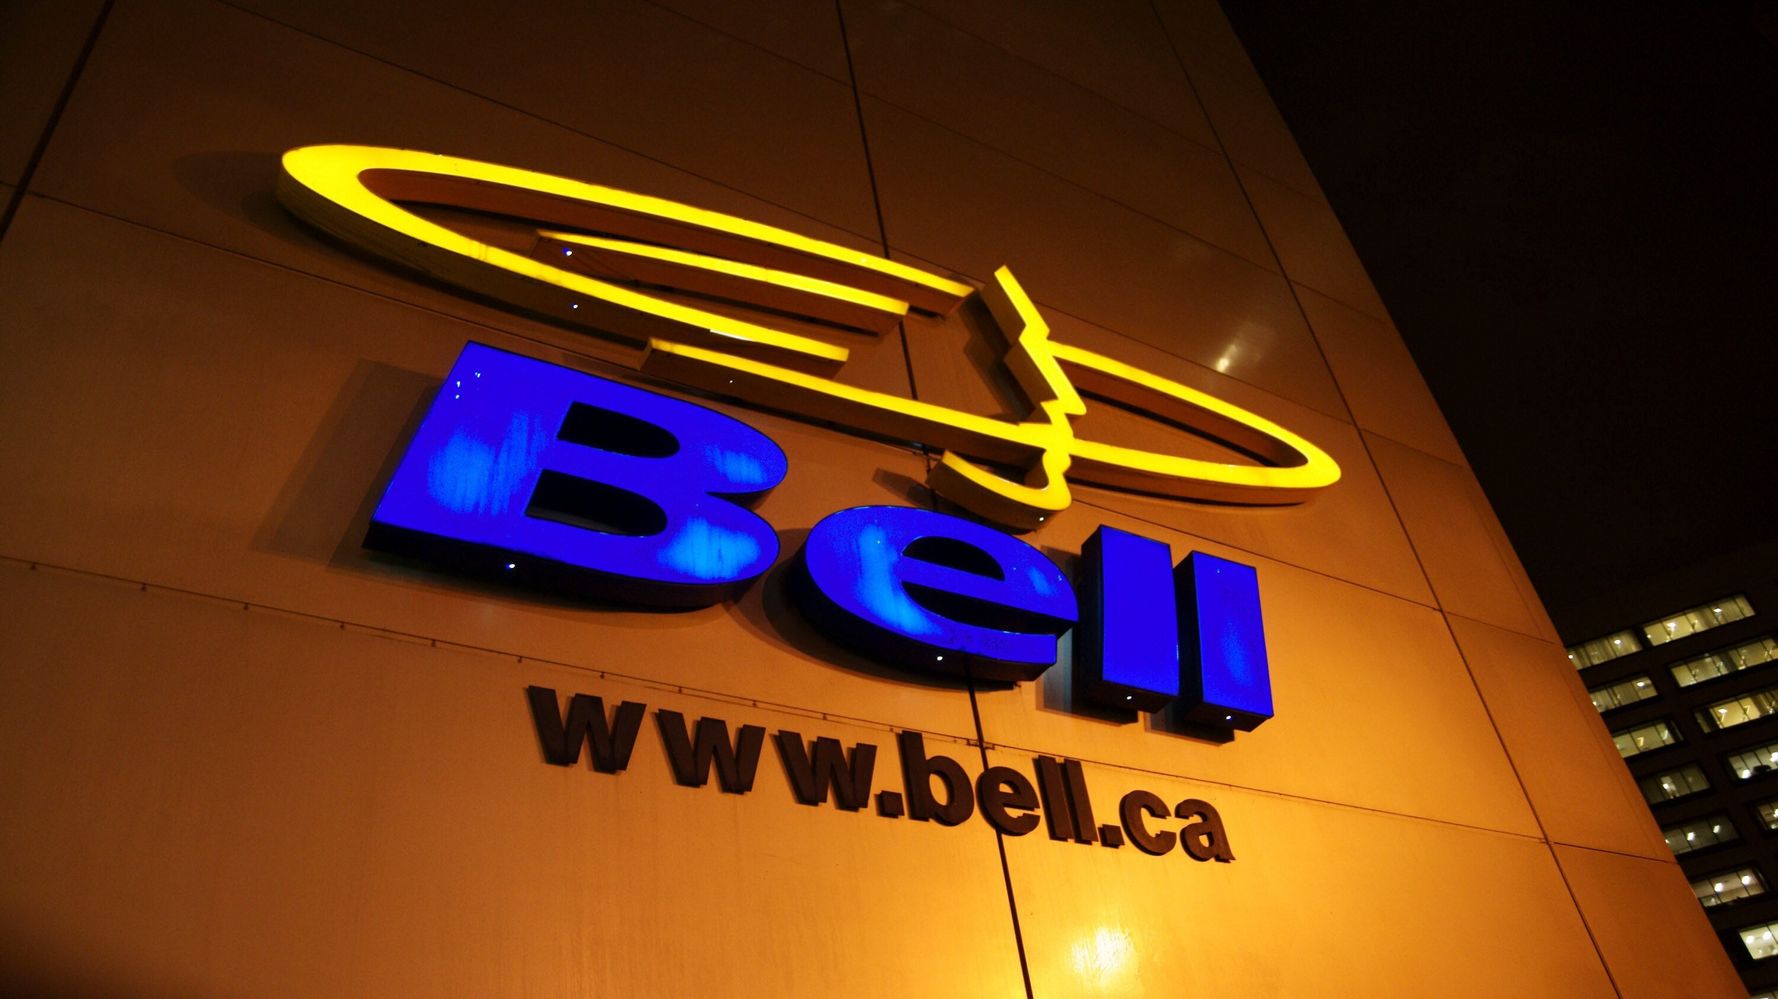 Bell Canada’s Call For Website Blocking ‘Outrageous,' Advocates Say